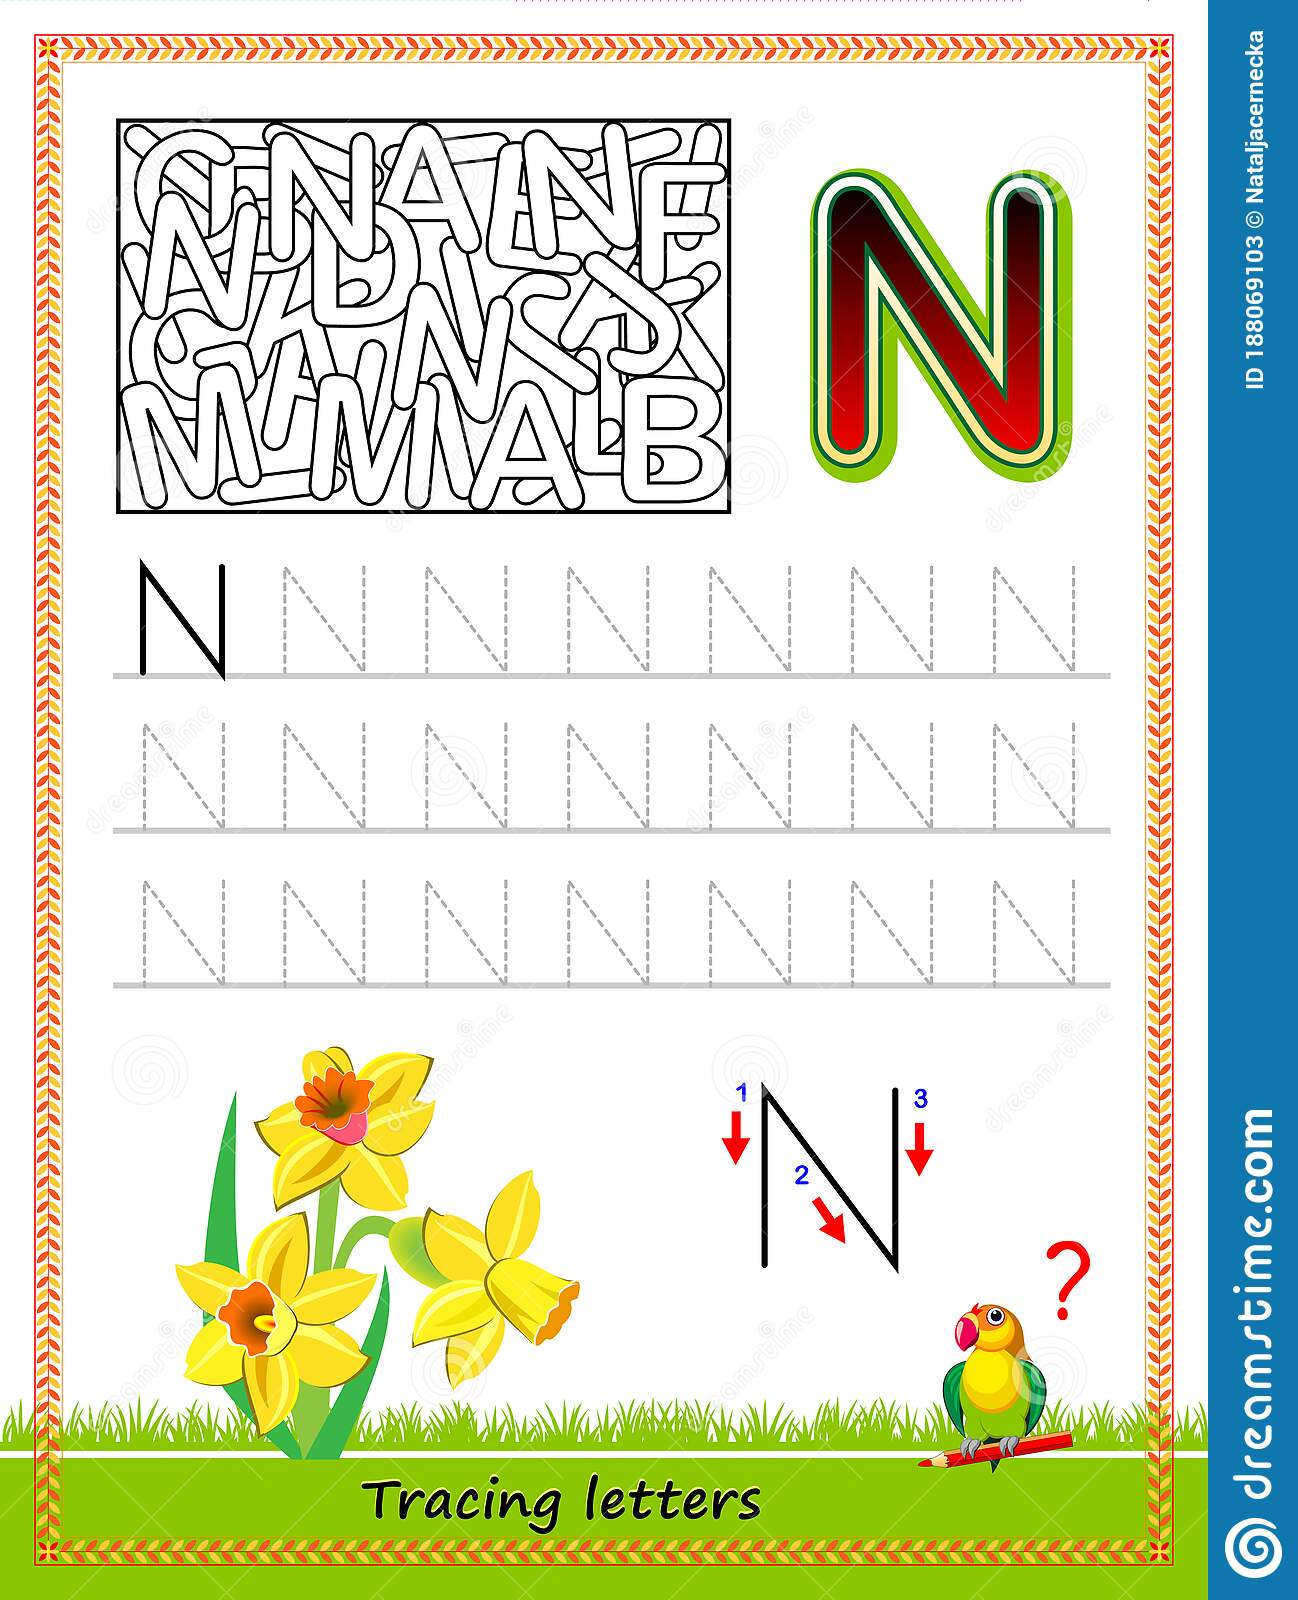 Worksheet For Tracing Letters. Find And Paint All Letters N intended for Abc Tracing Online